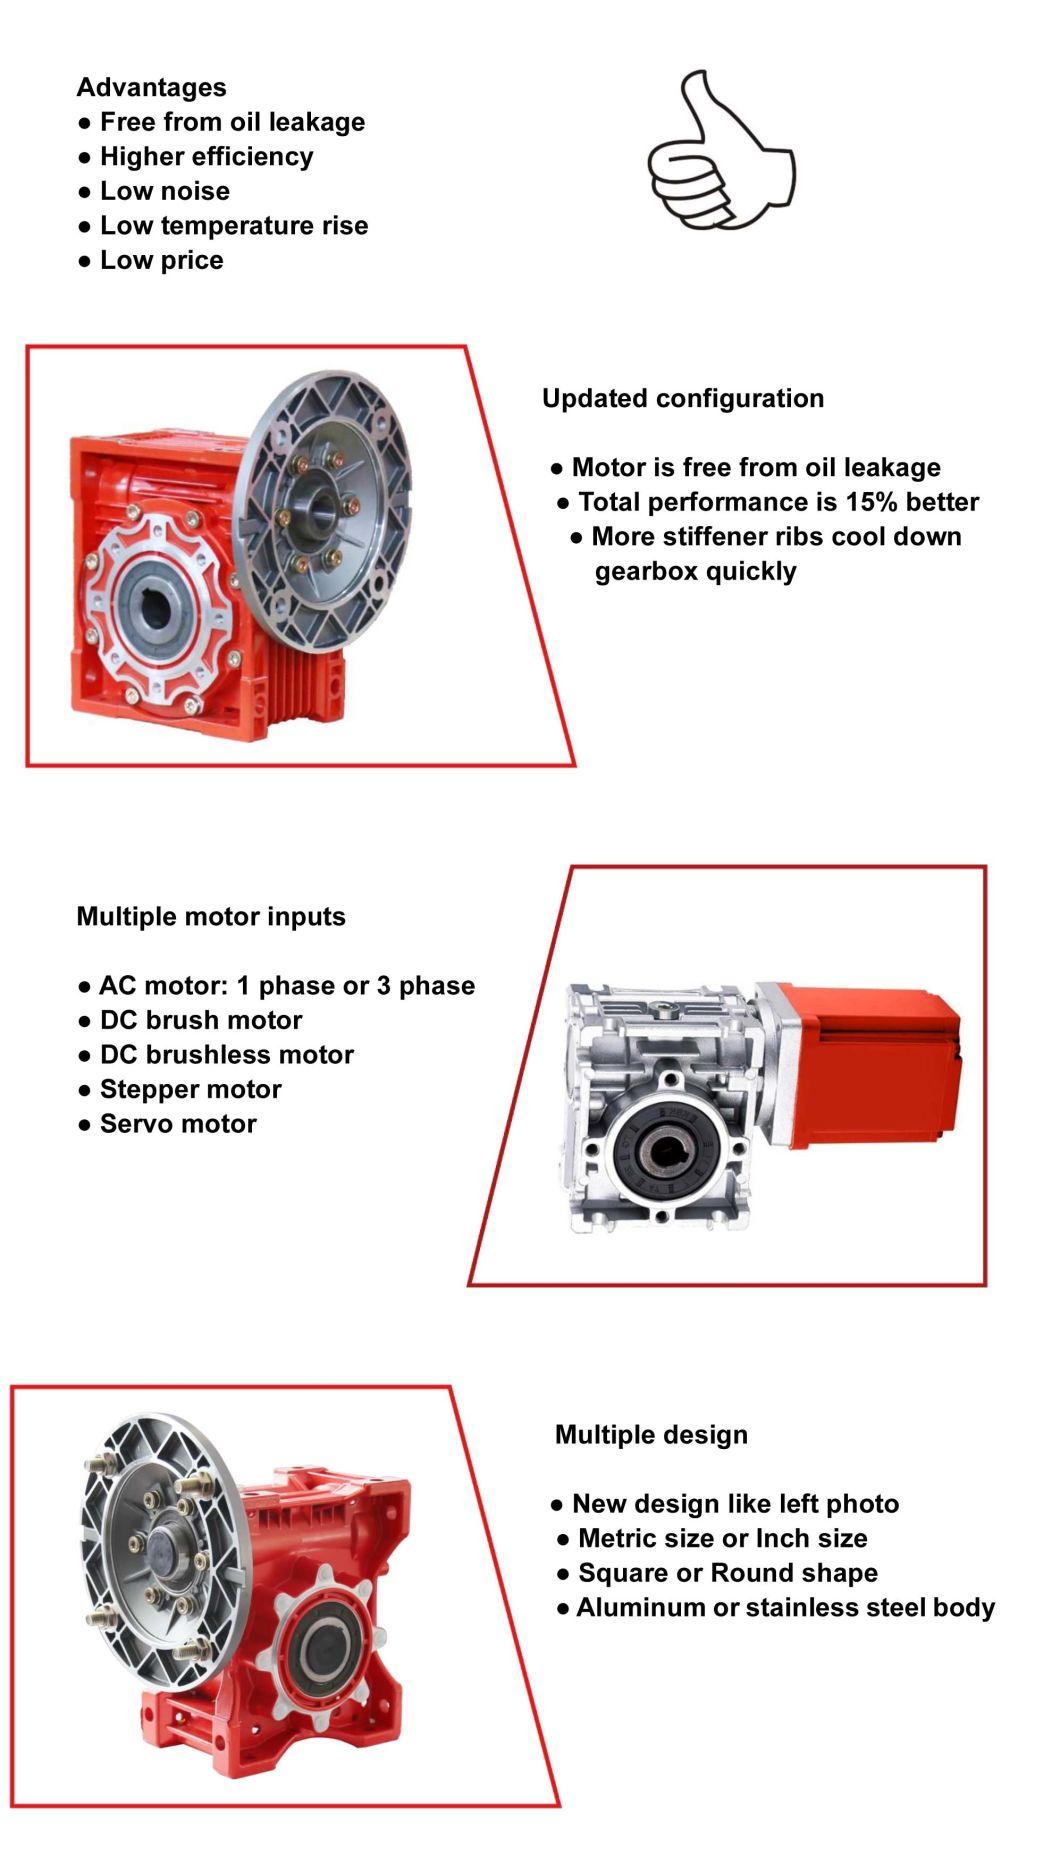 Transmission Geared Motor Unit Wp Nmrv Swl Screw Drive Lifts Stepper Cyclo Cycloidal Extruder Helical Planetary Bevel Worm Speed Variator Gear Reducer Gearbox